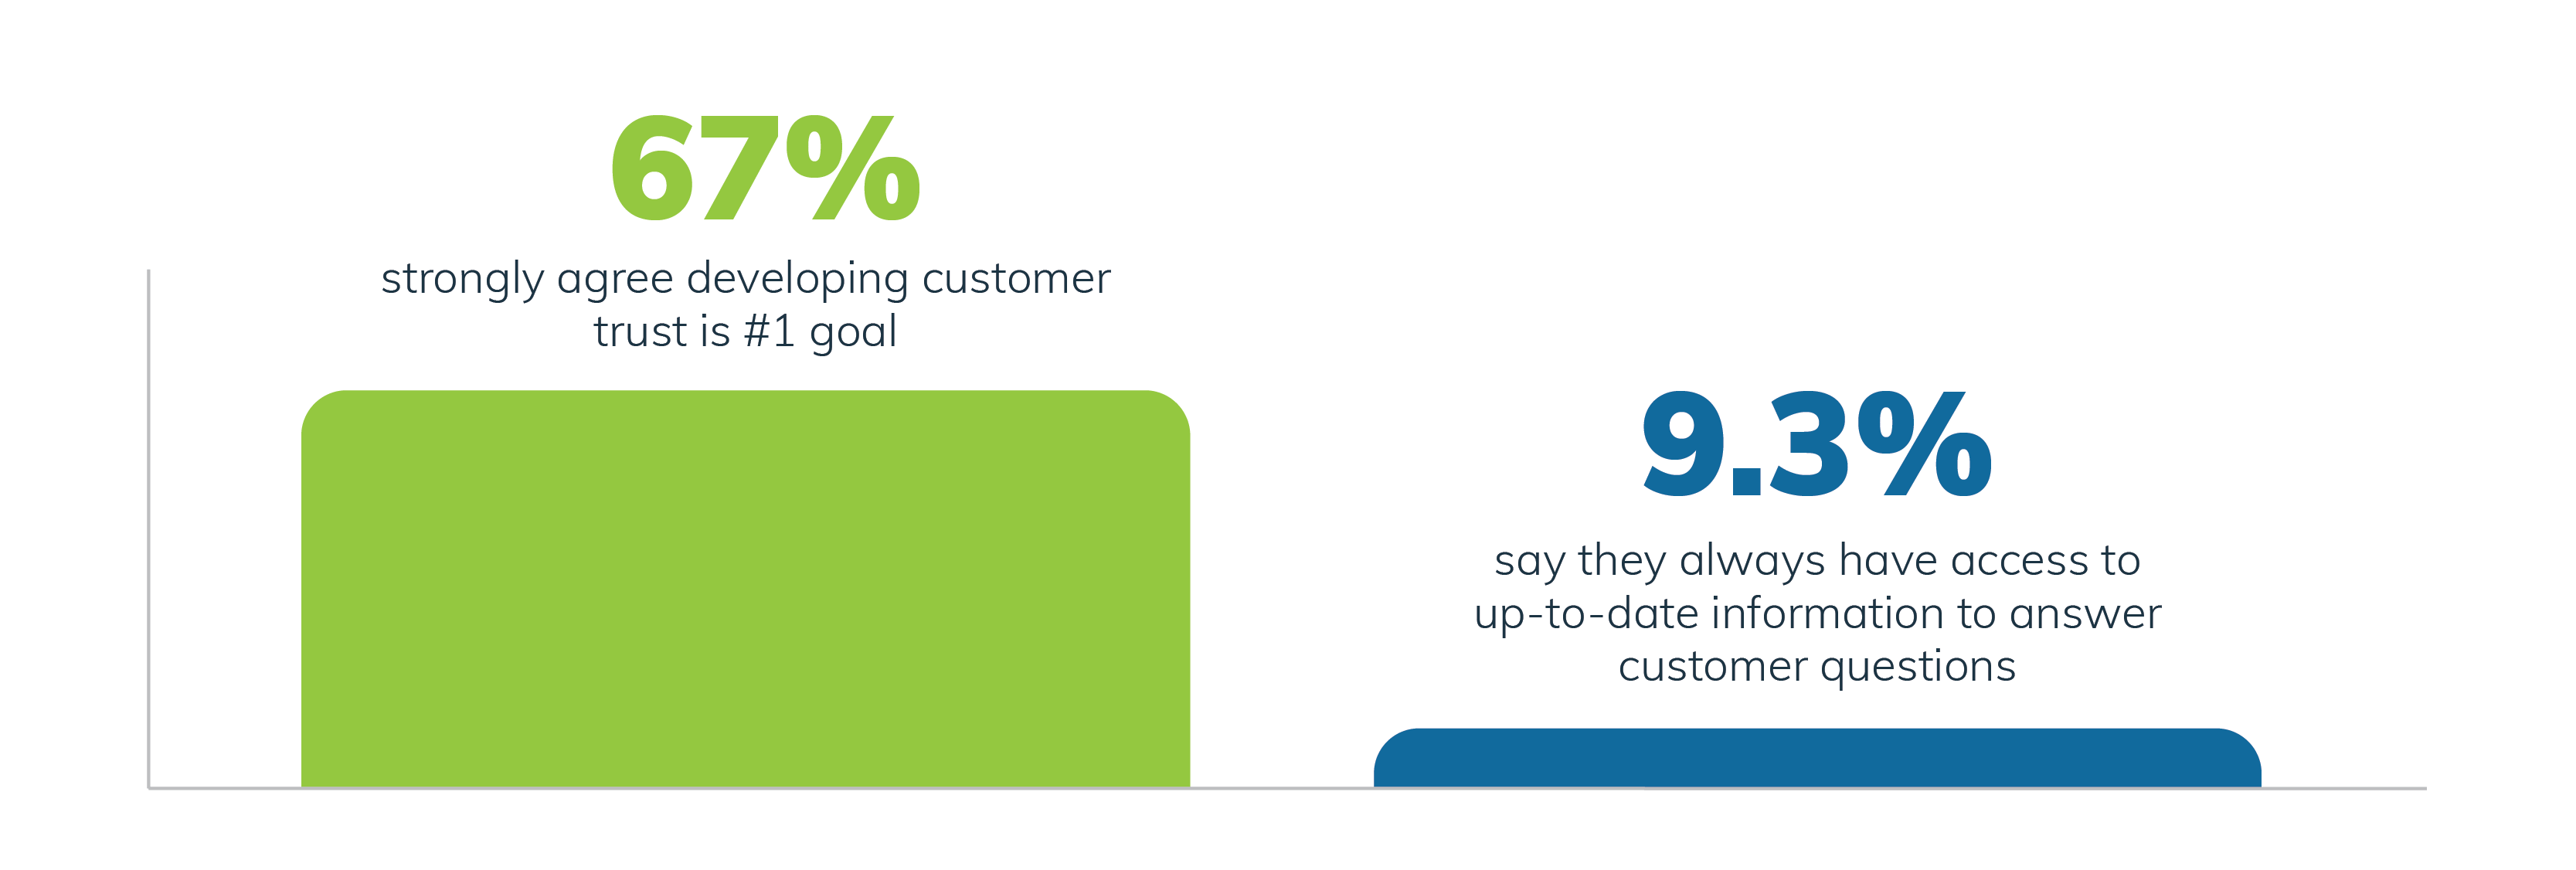 Most pre-sales professionals strongly agree developing customer trust is their top priority.